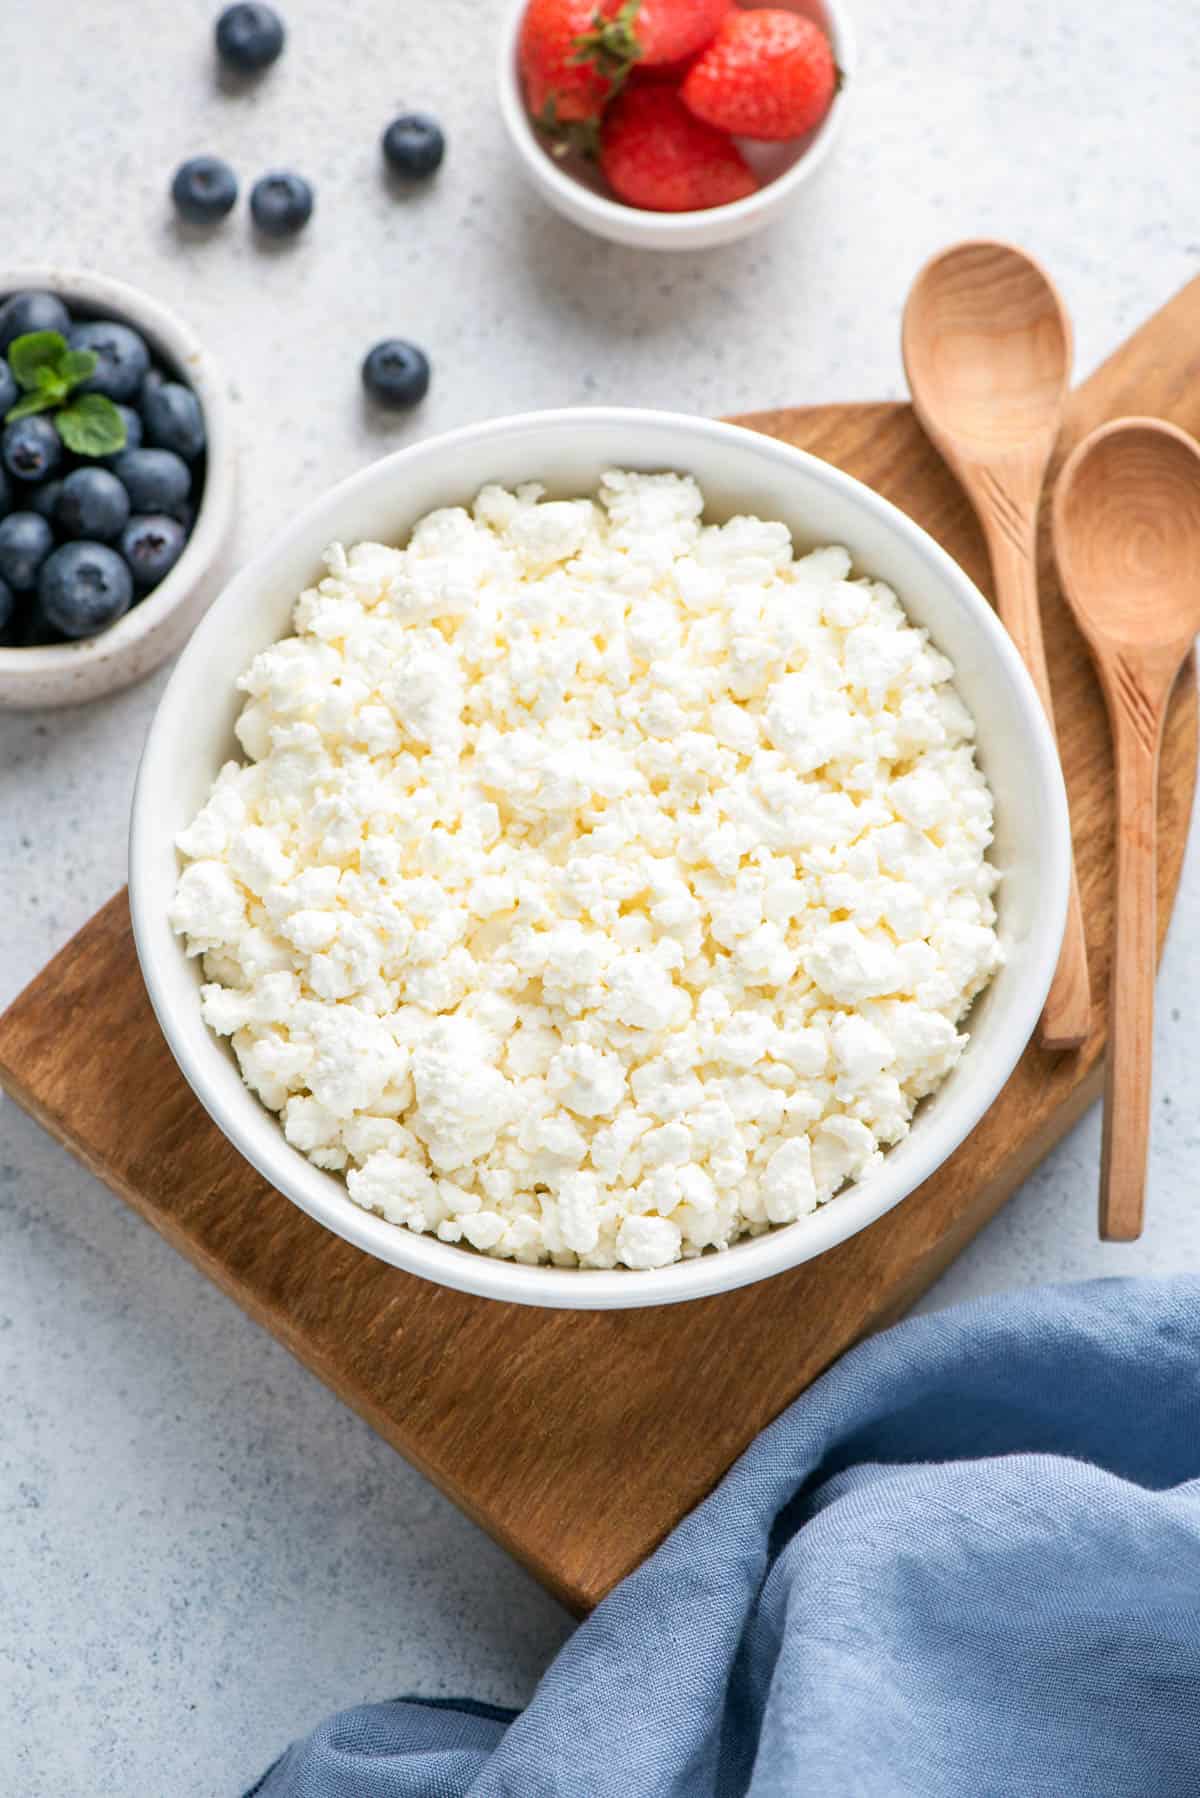 Can You Freeze Ricotta Cheese?